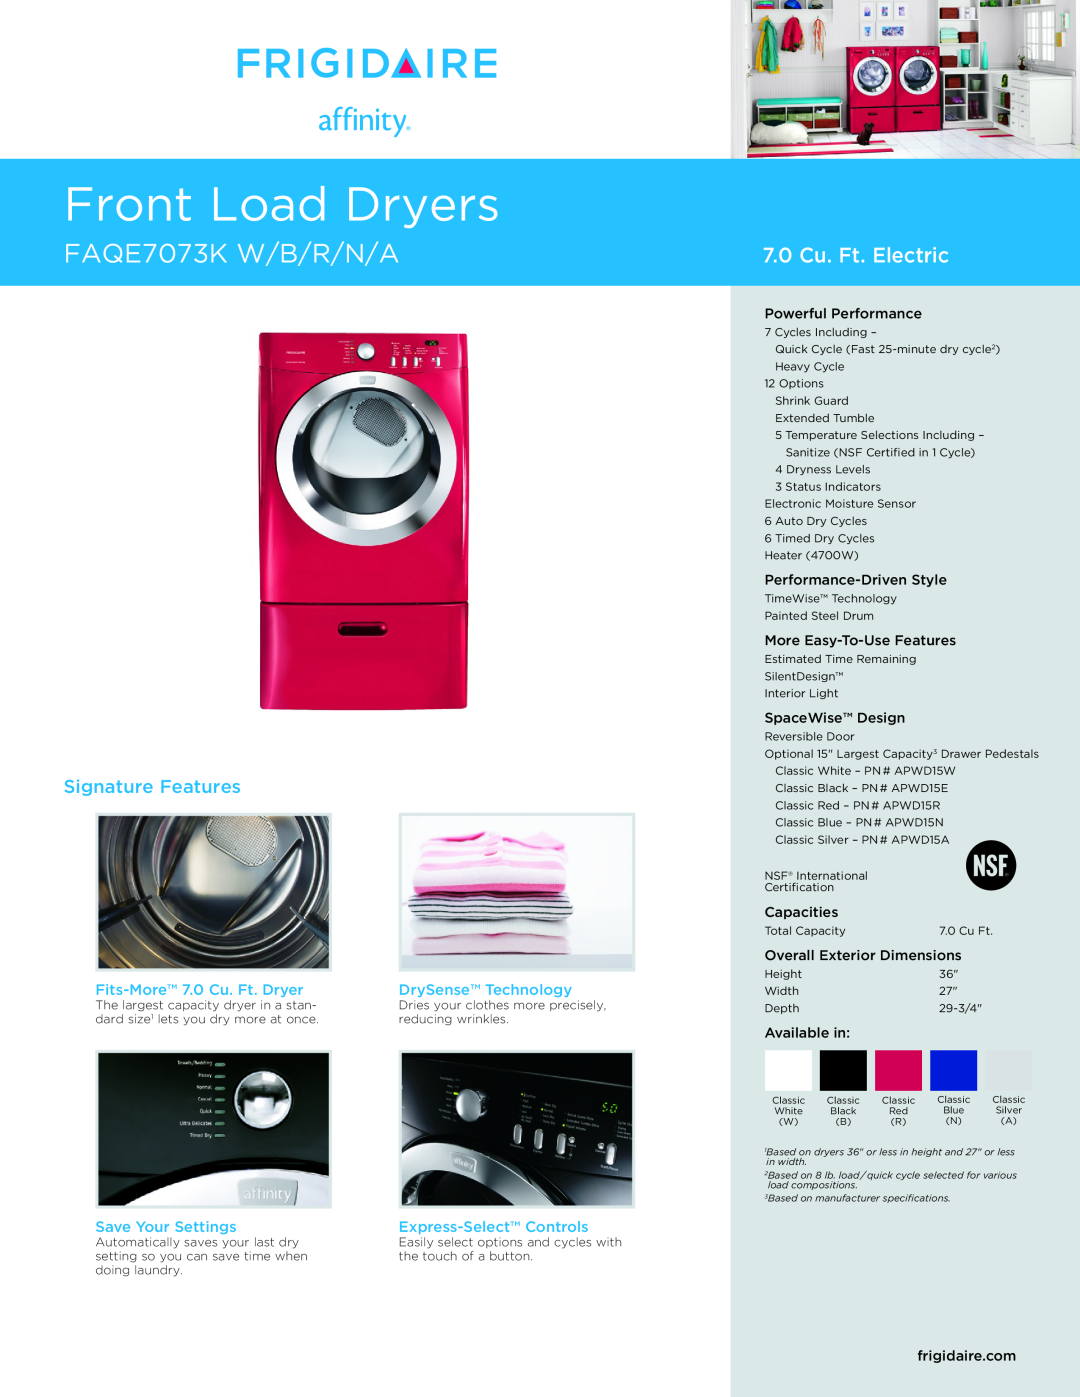 Frigidaire FAQE7073K W/B/R/N/A dimensions Fits-More 7.0 Cu. Ft. Dryer, DrySense Technology, Save Your Settings, Capacities 